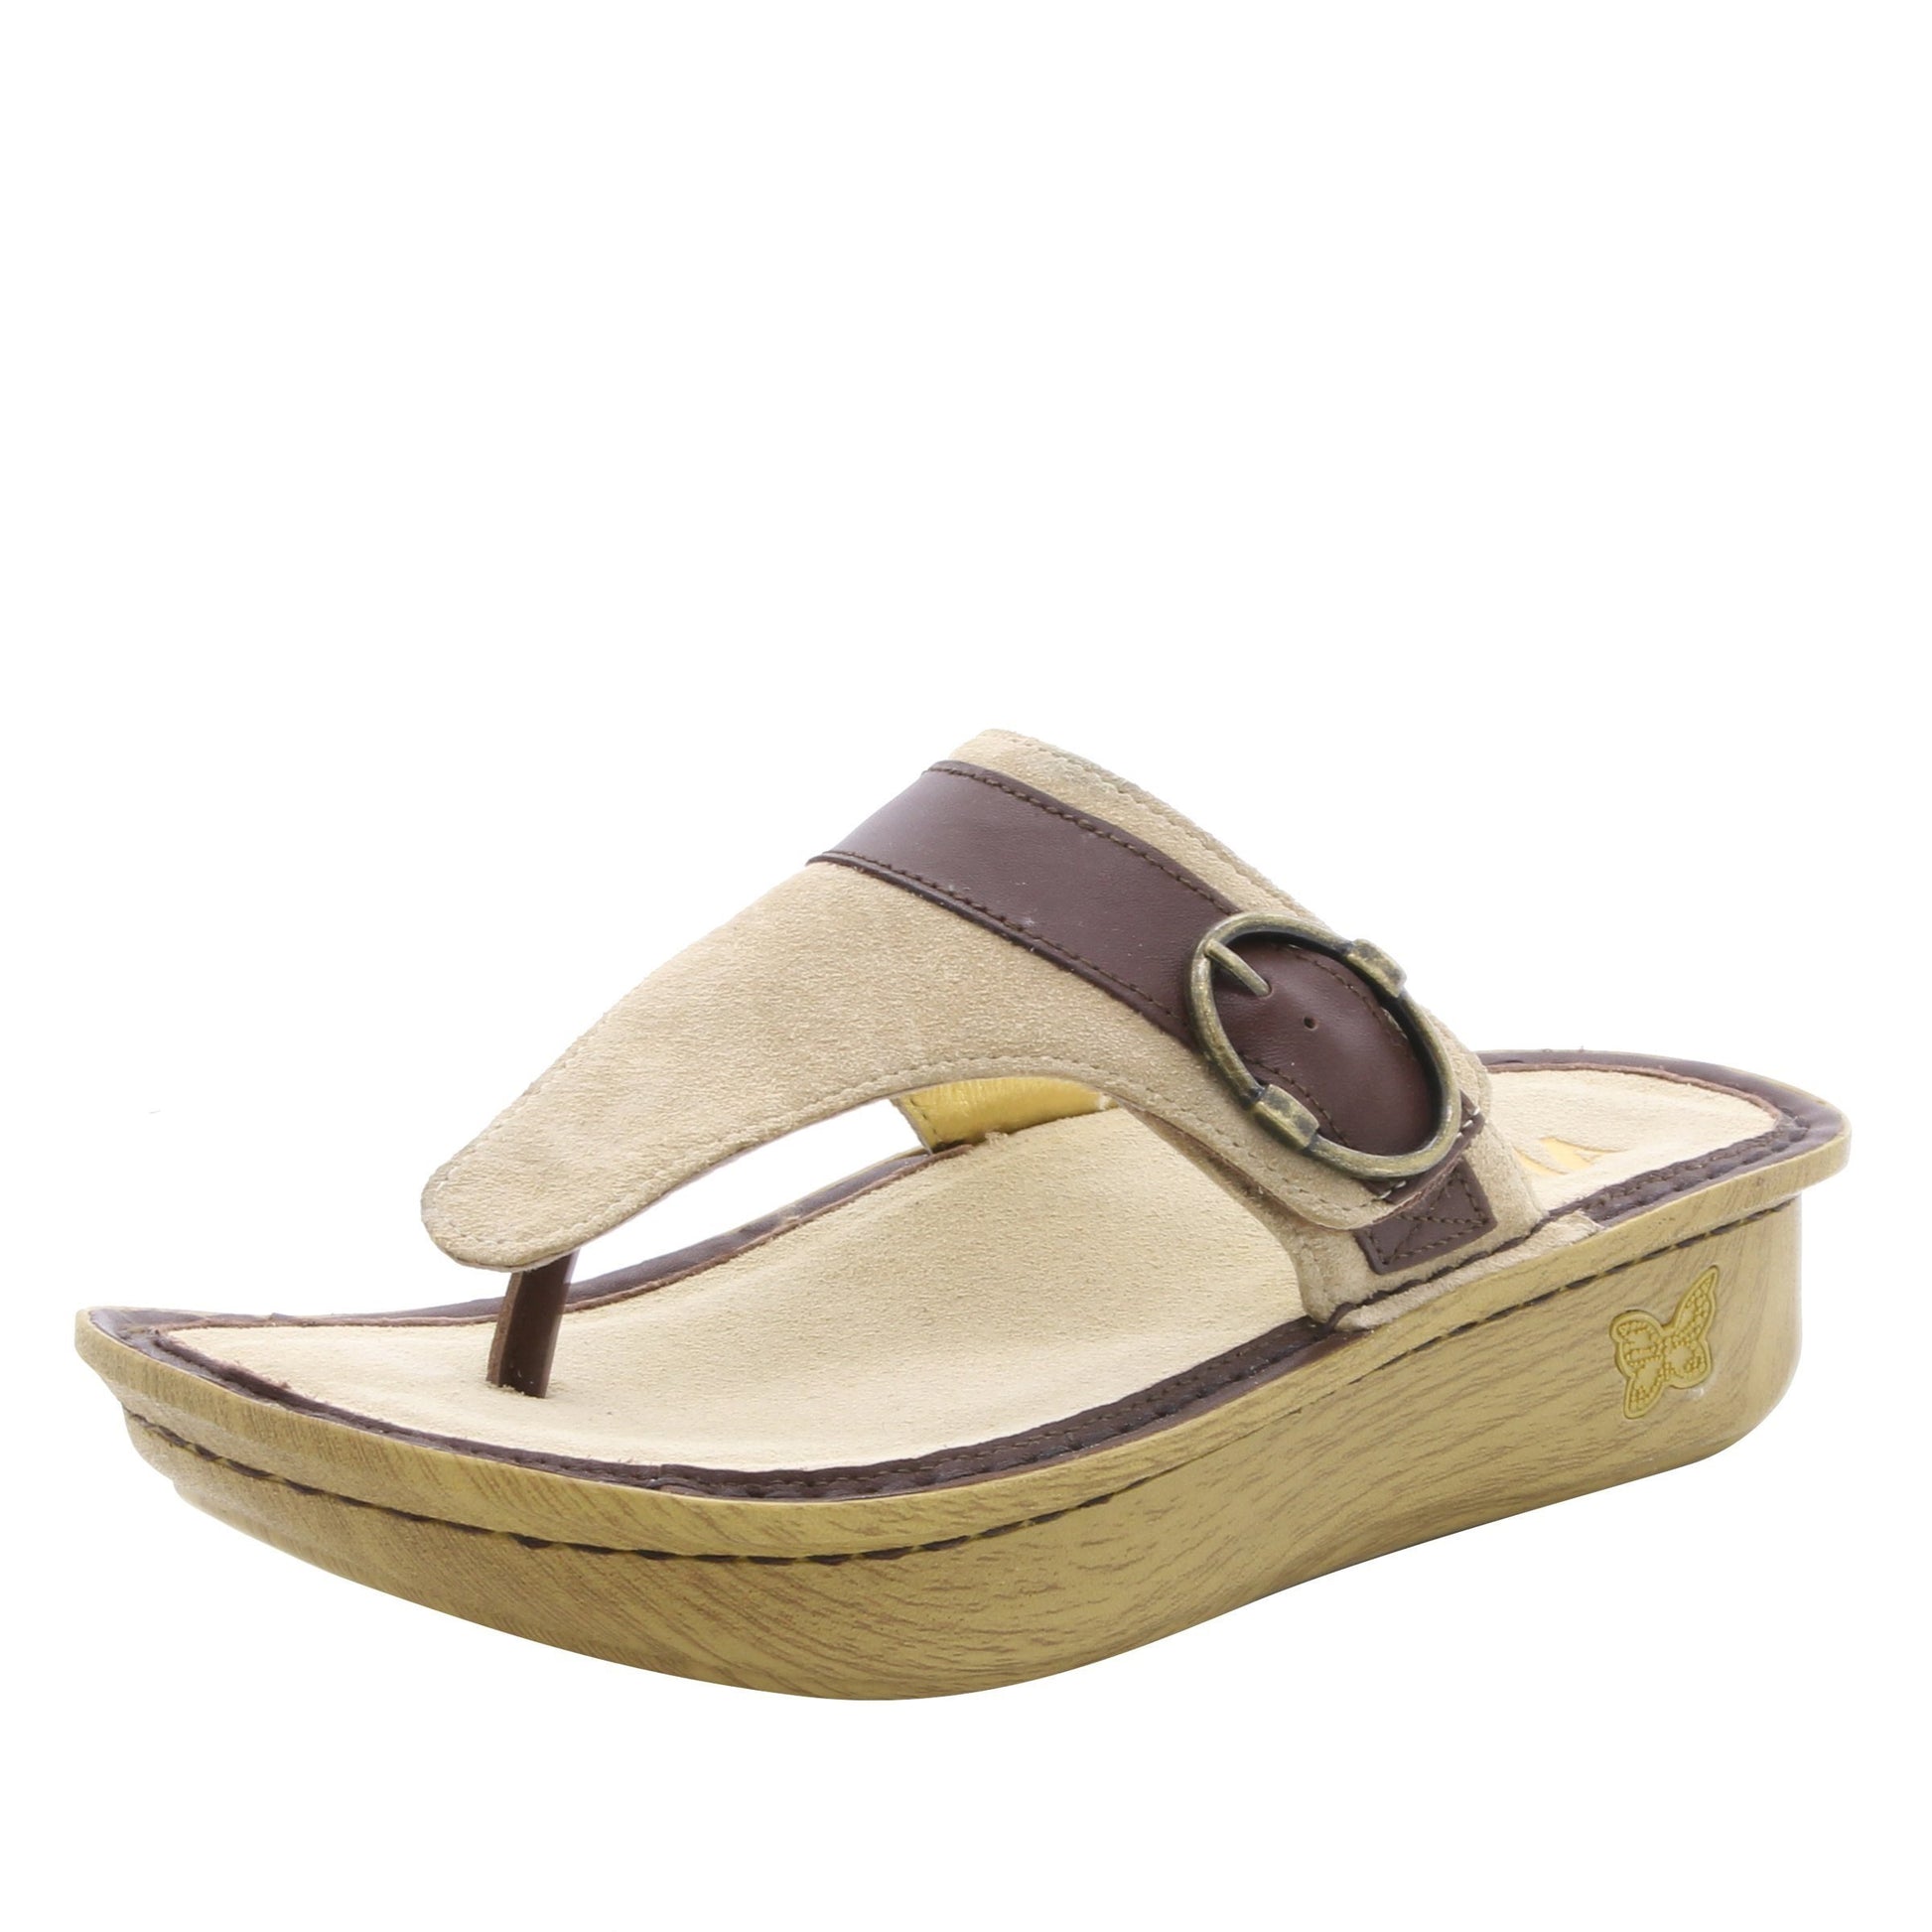 Alegria Sale Shoe Size 37 Cody Thong Sandal in Sand at Parker's Clothing and Shoes.